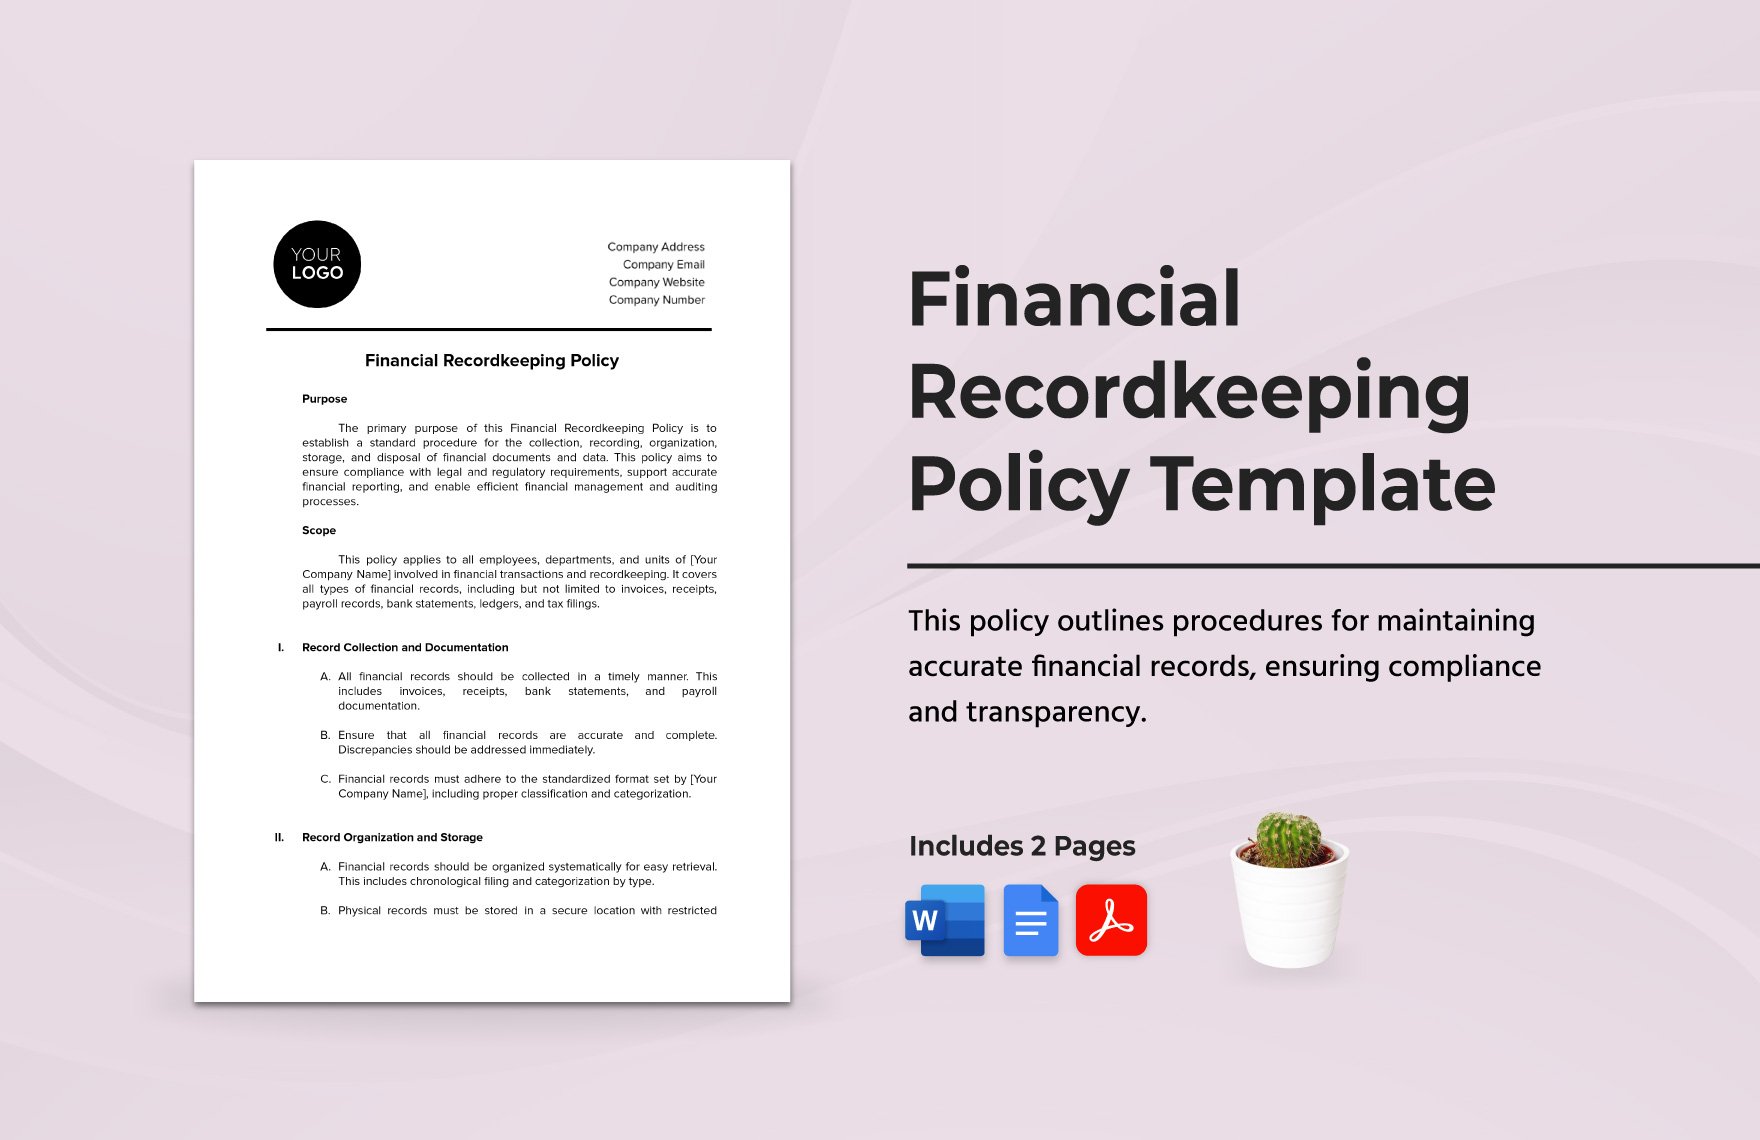 Financial Recordkeeping Policy Template